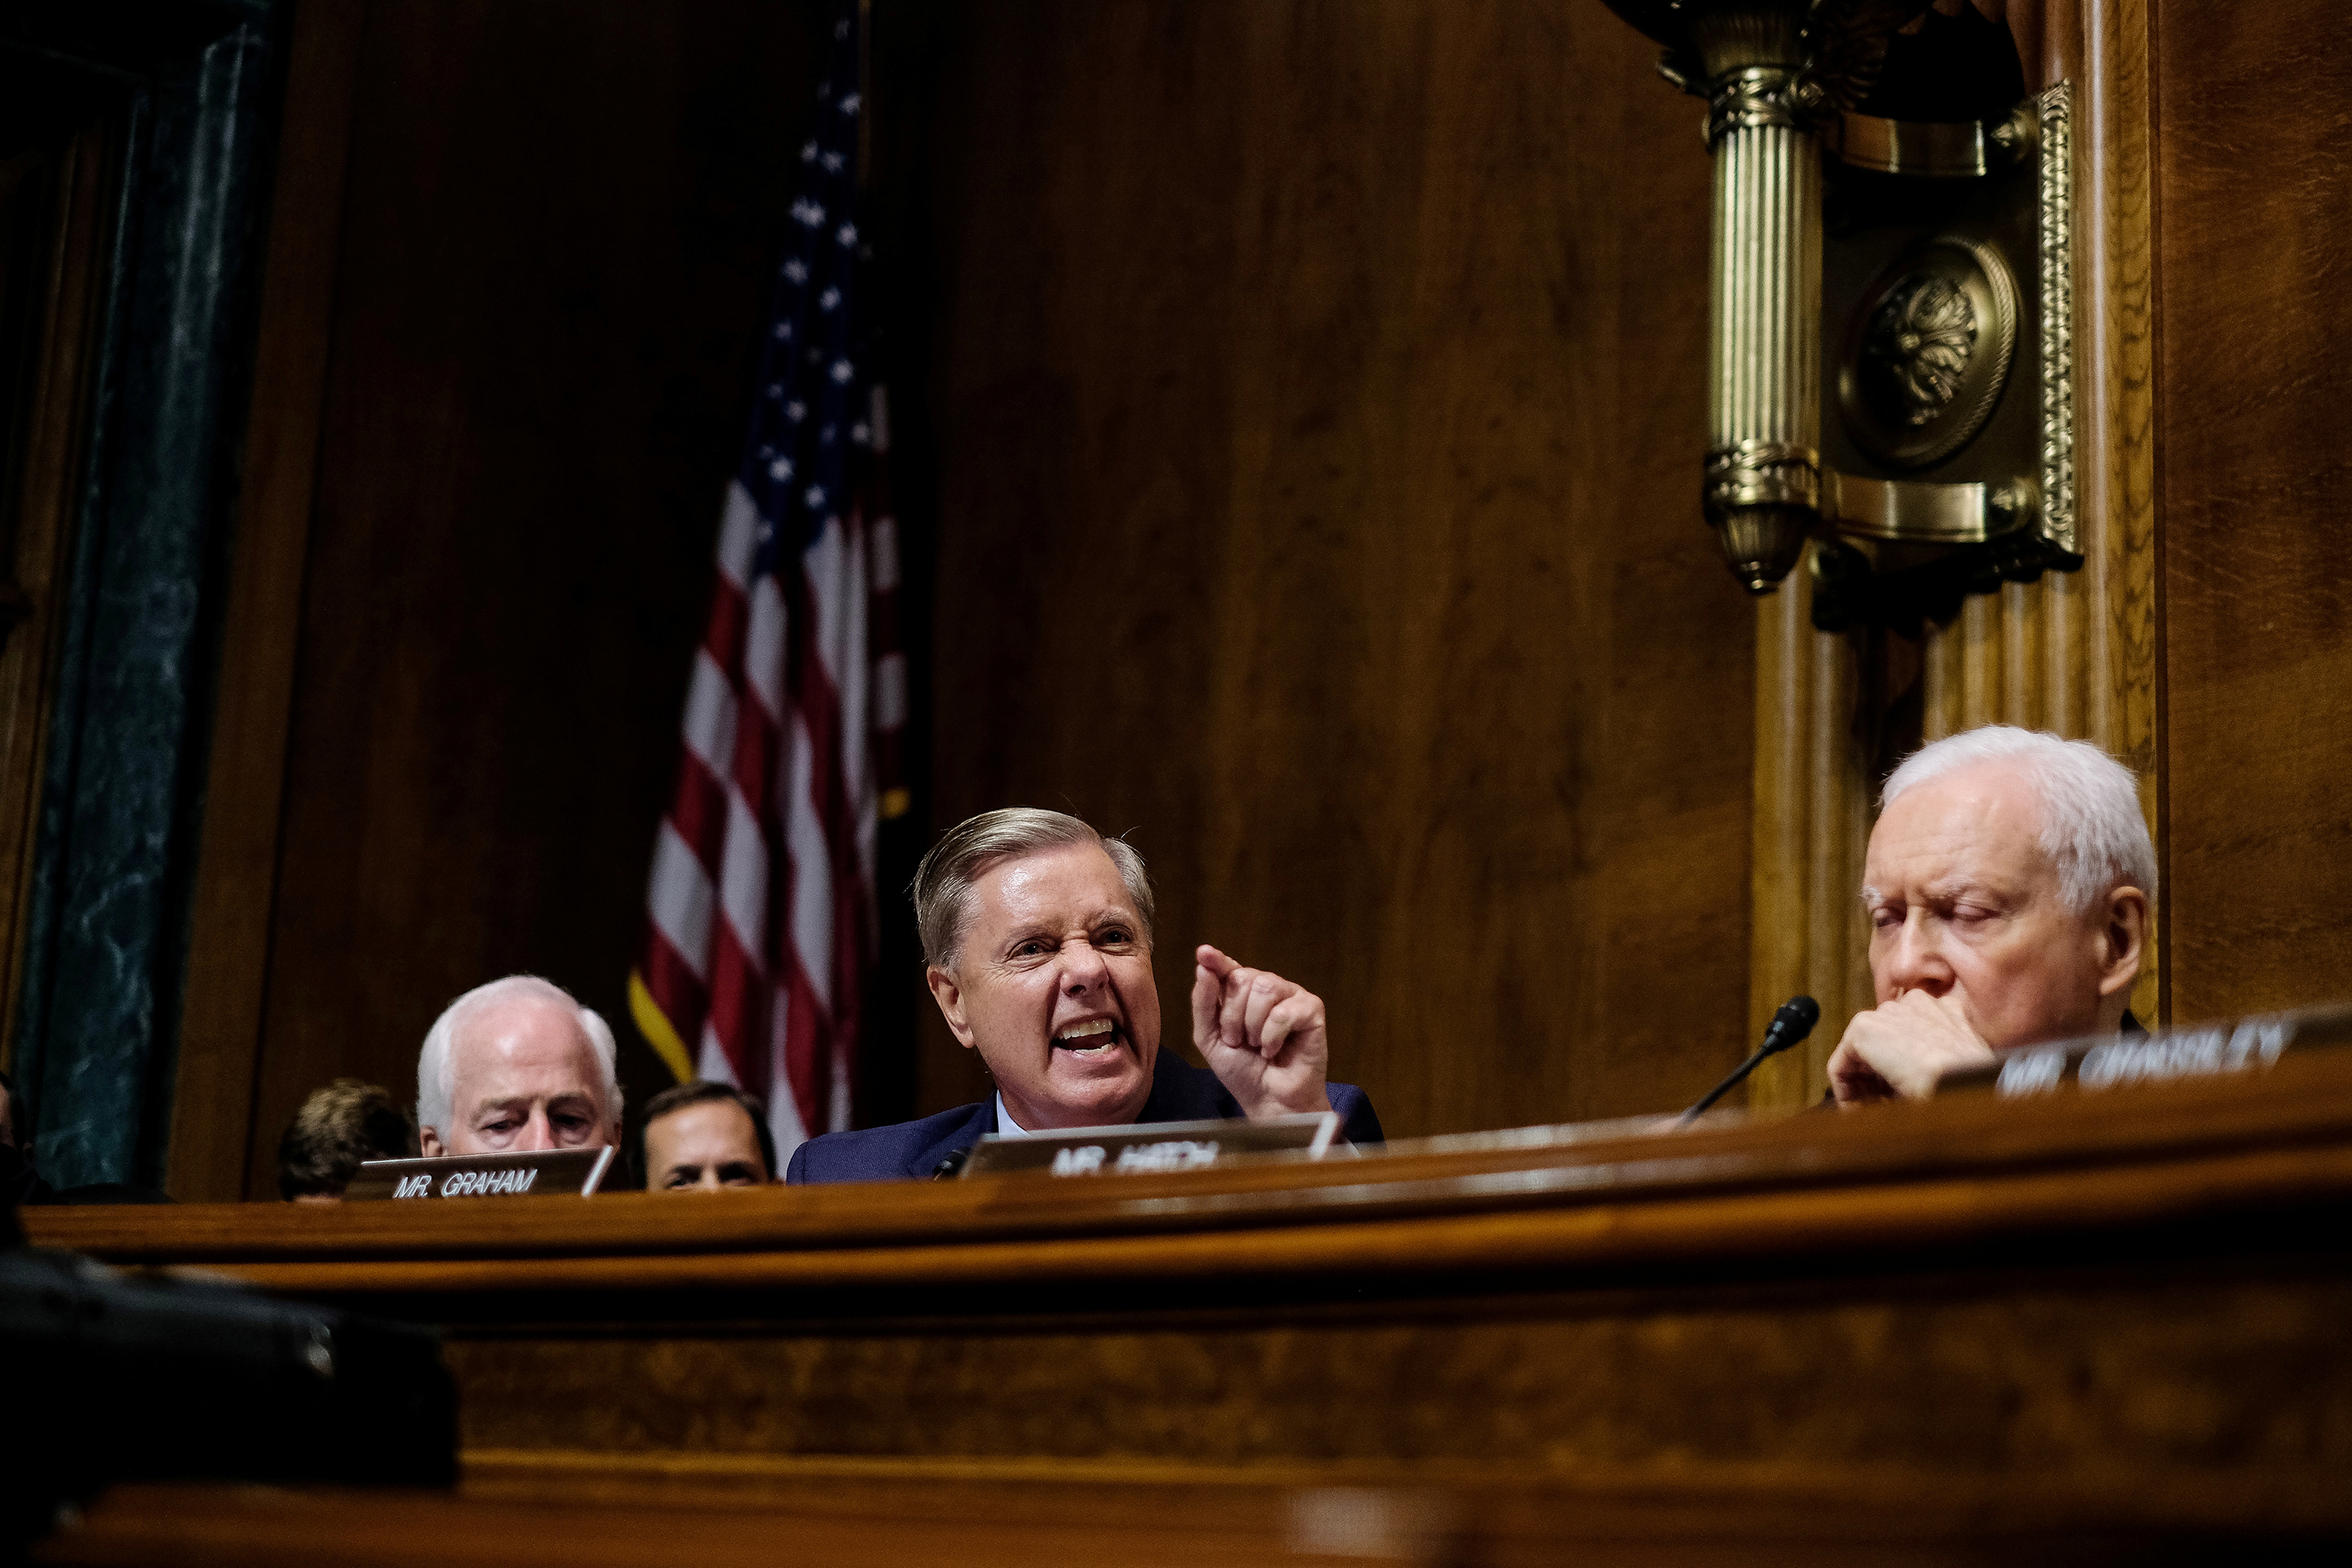 Sen. Lindsey Graham becomes angry during the questioning of Judge Brett Kavanaugh in front of the Senate Judiciary Committee on Sept. 27. (Gabriella Demczuk—The New York Times/Pool/Reuters)